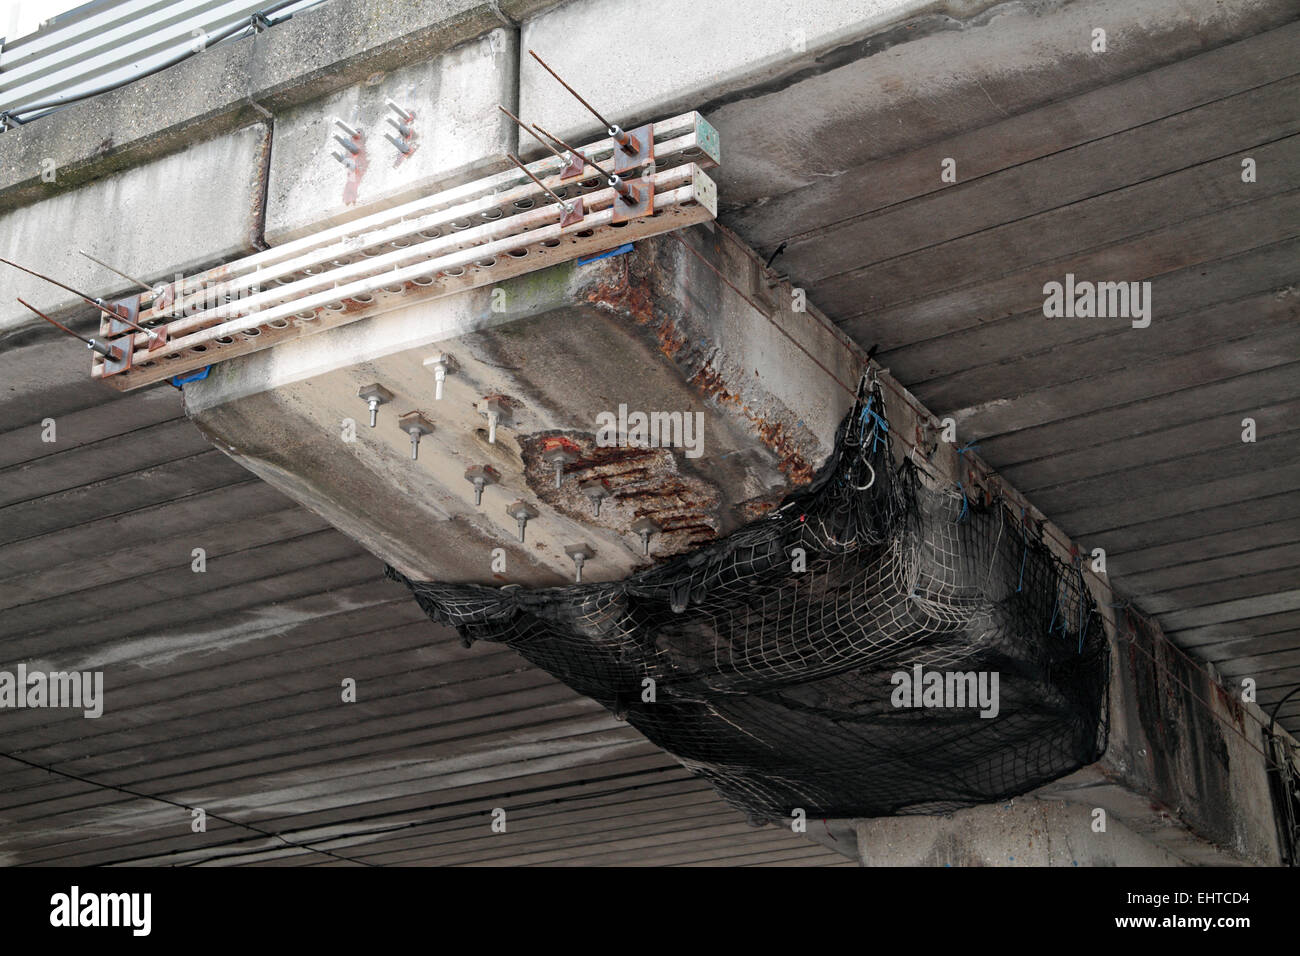 Exposed steel reinforcing being repaired on the elevated section of the M4 motorway in Brentford, West London, England. Stock Photo